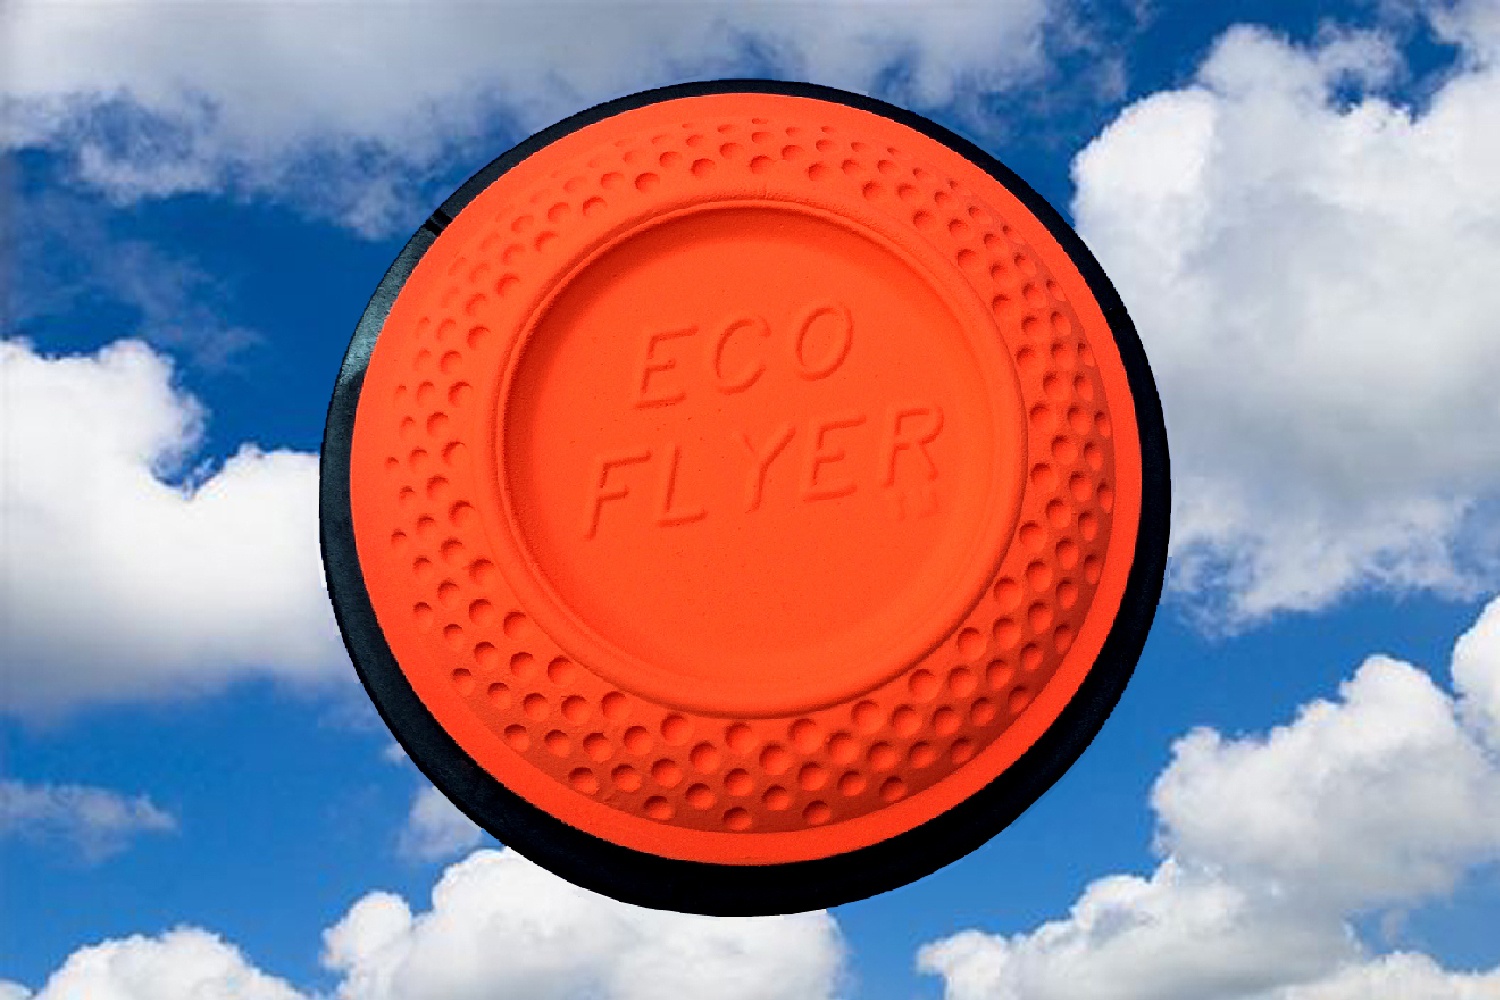 WHITE FLYER INTRODUCES “ECO FLYER”™ FOR A NEW GENERATION OF THE SHOOTING SPORTS